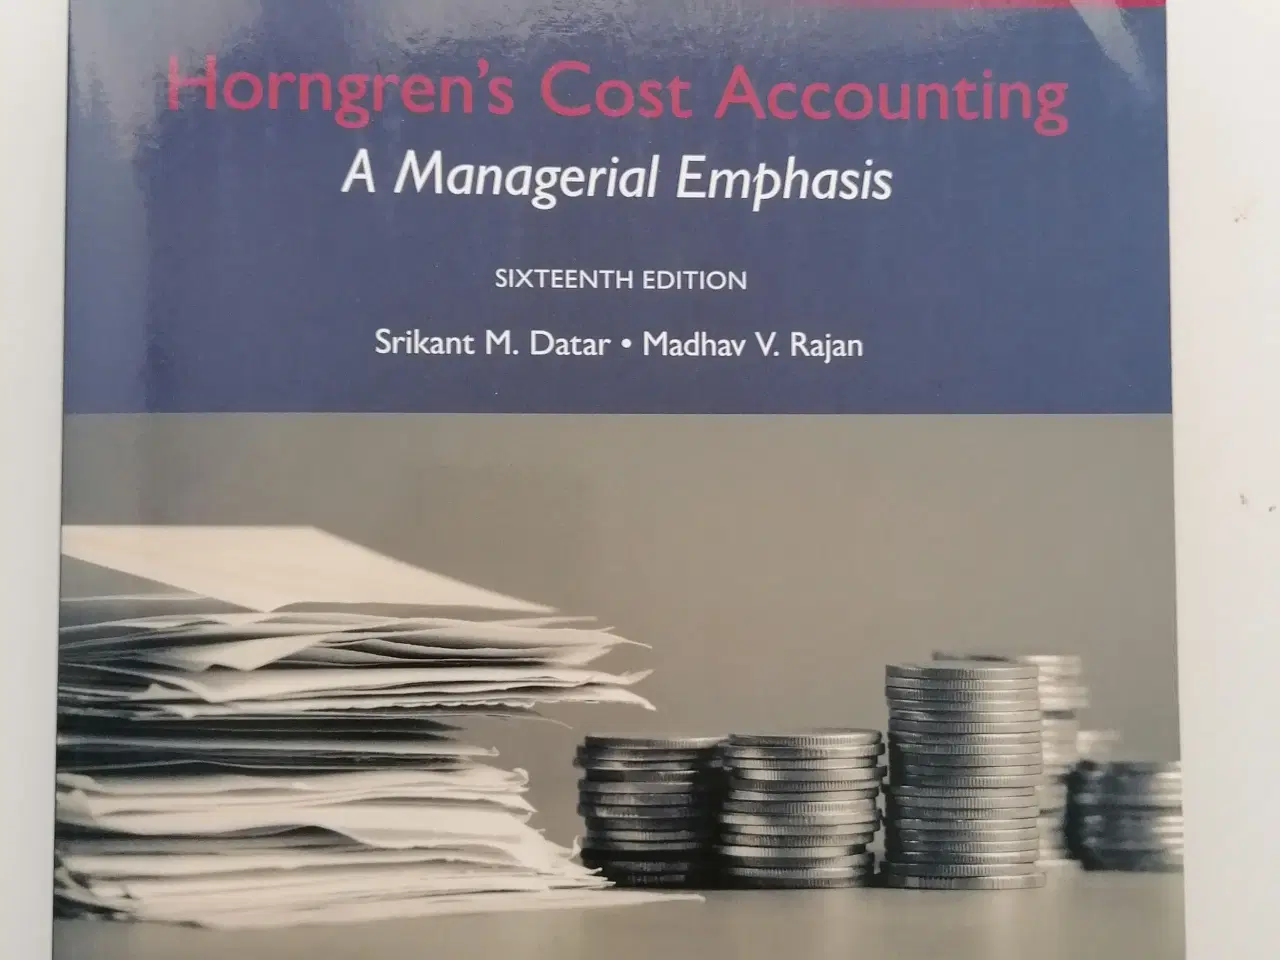 Billede 1 - Horngren's Cost Accounting: A Managerial Emphasis